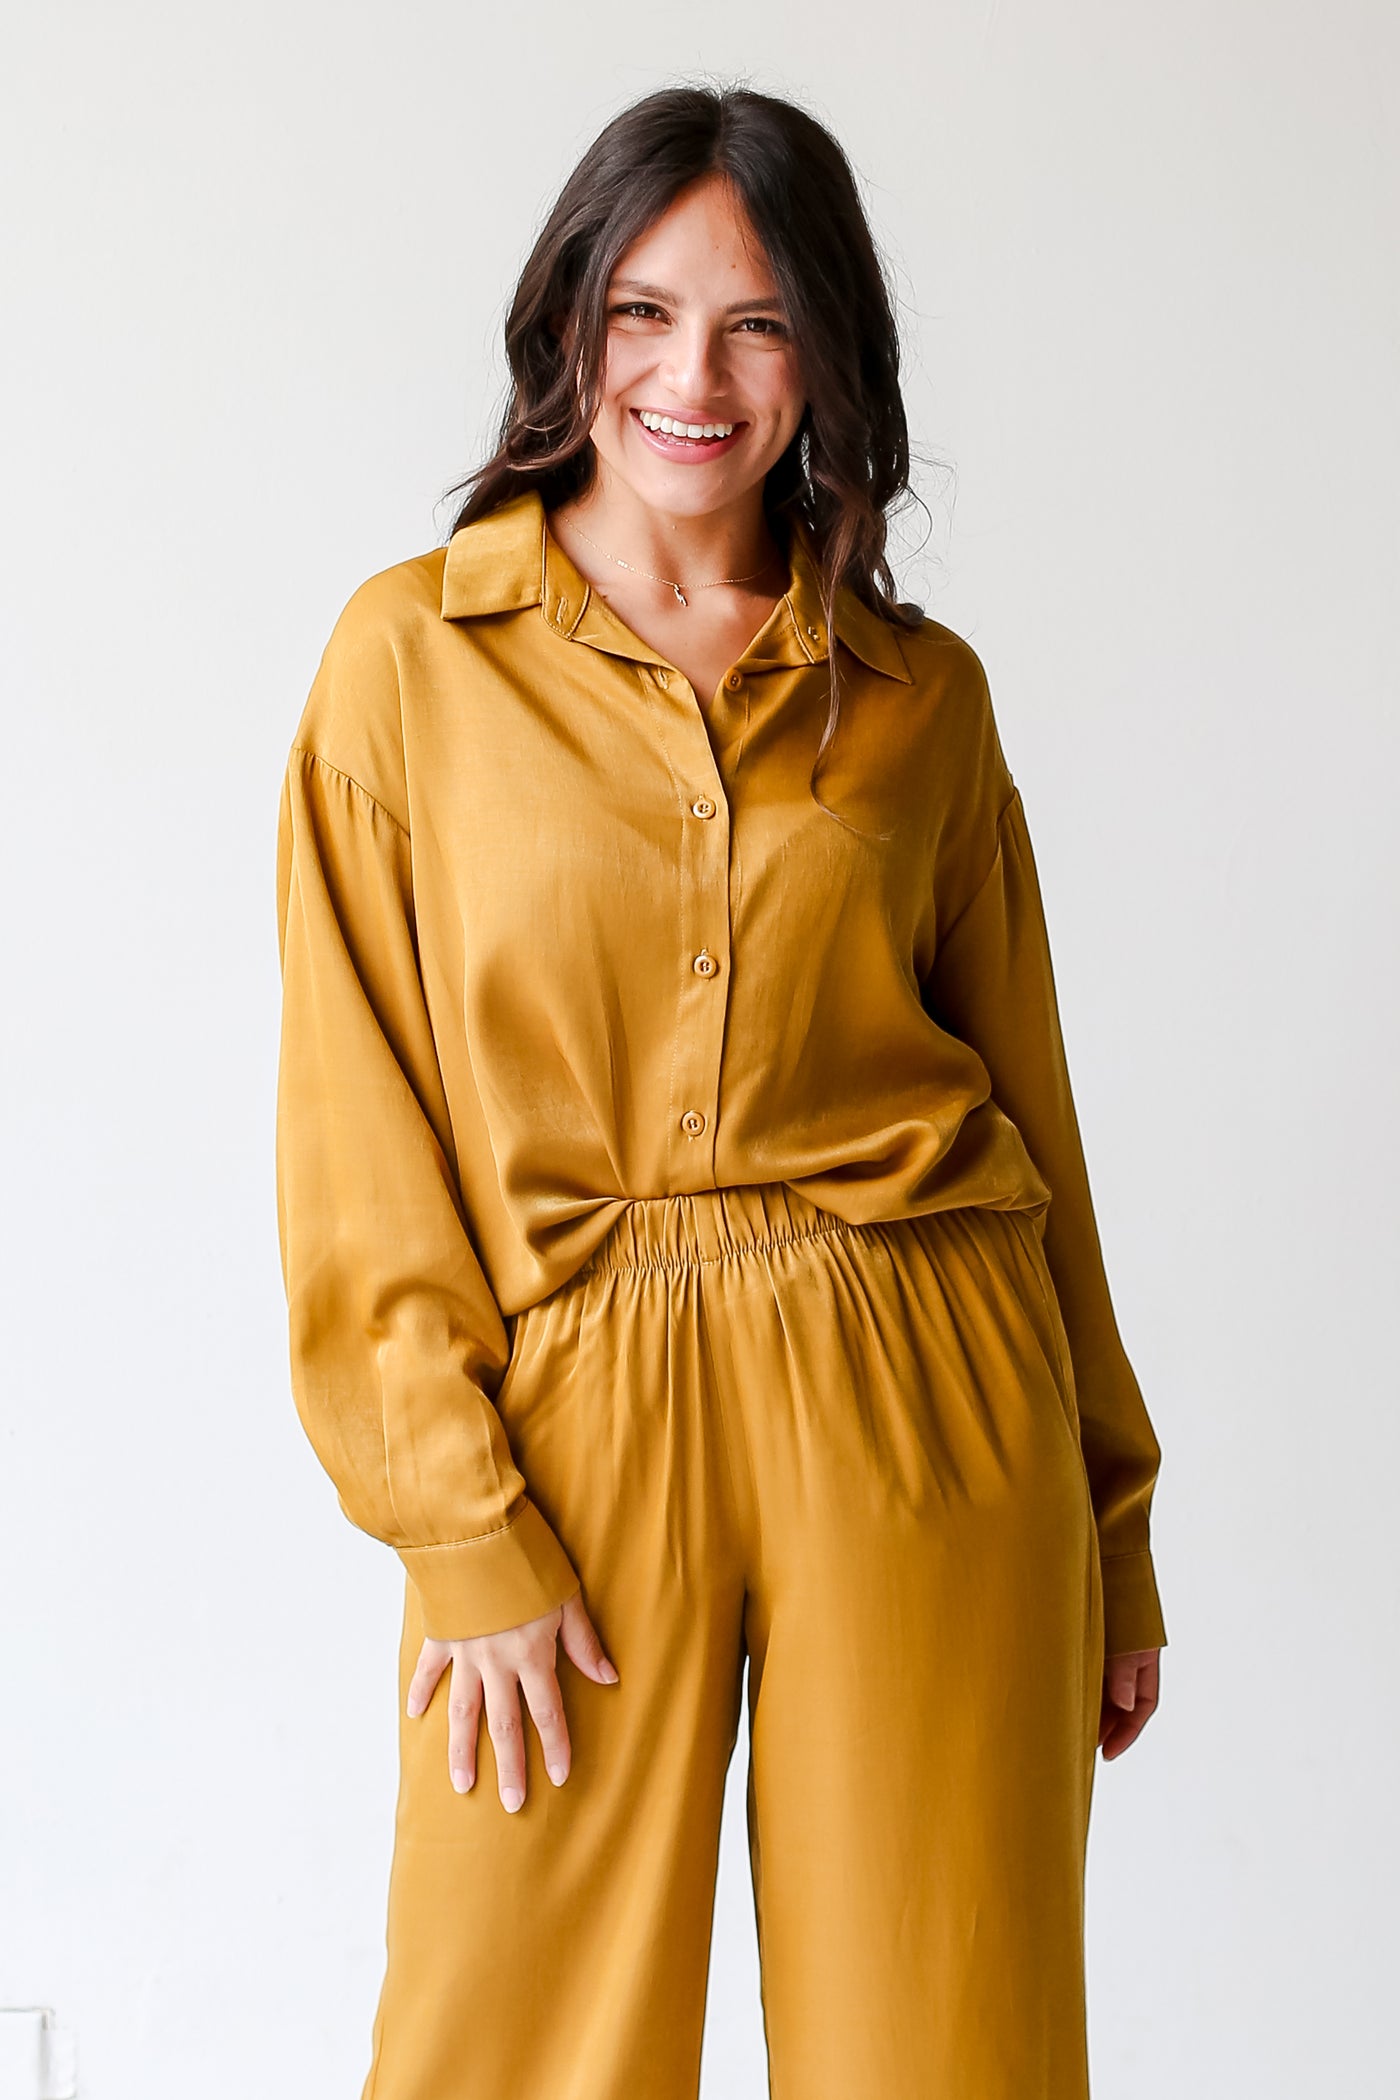 model wearing a yellow Button-Up Blouse